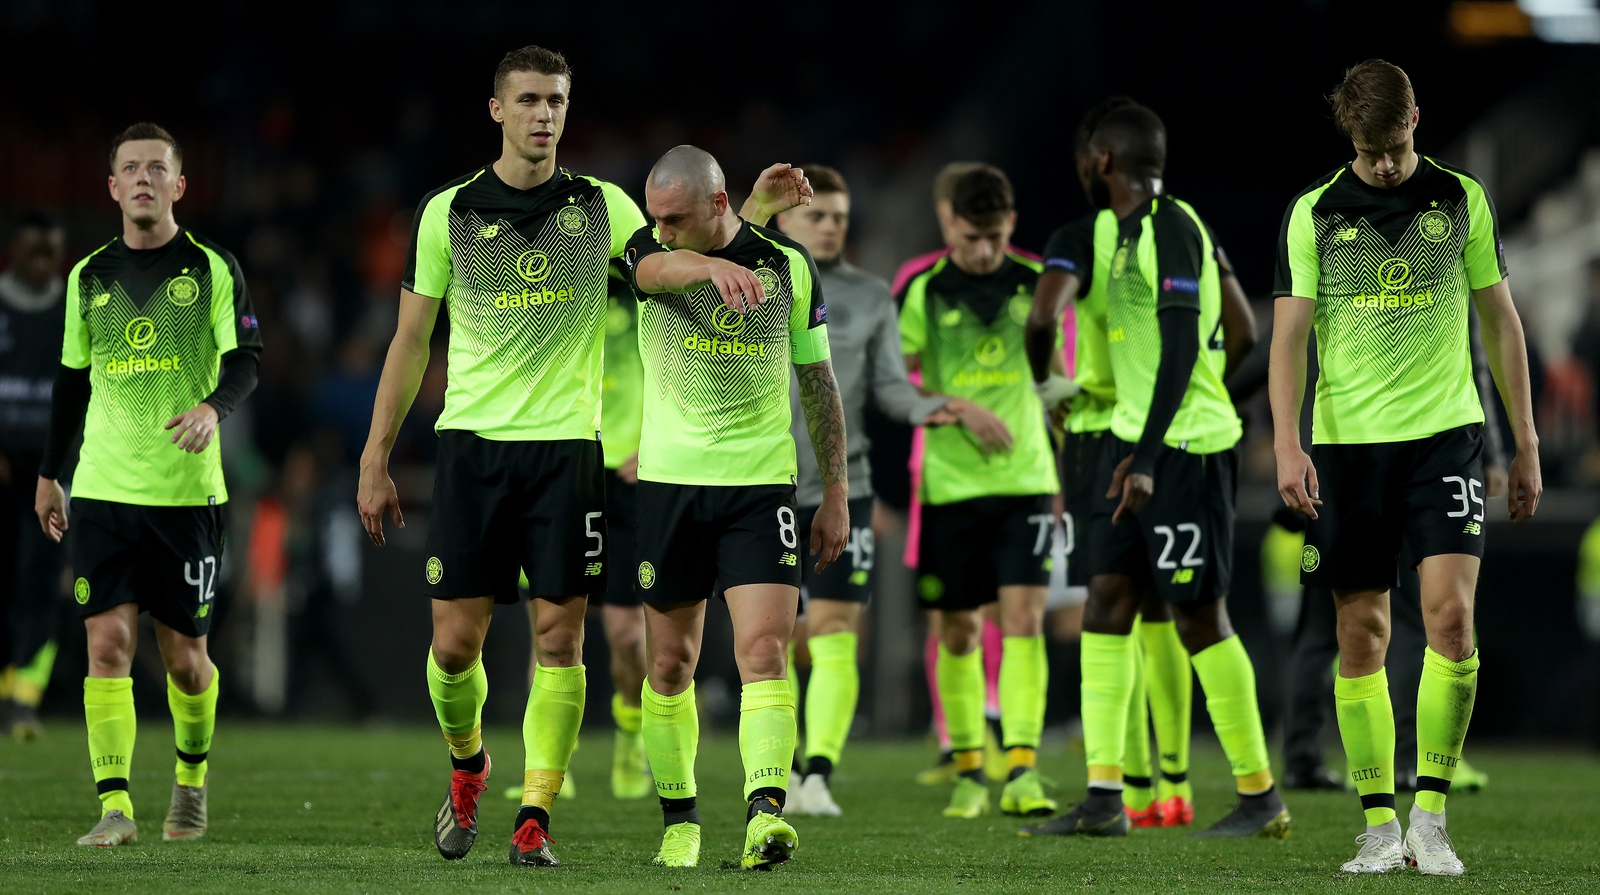 Celtic exit after narrow defeat on night to Valencia